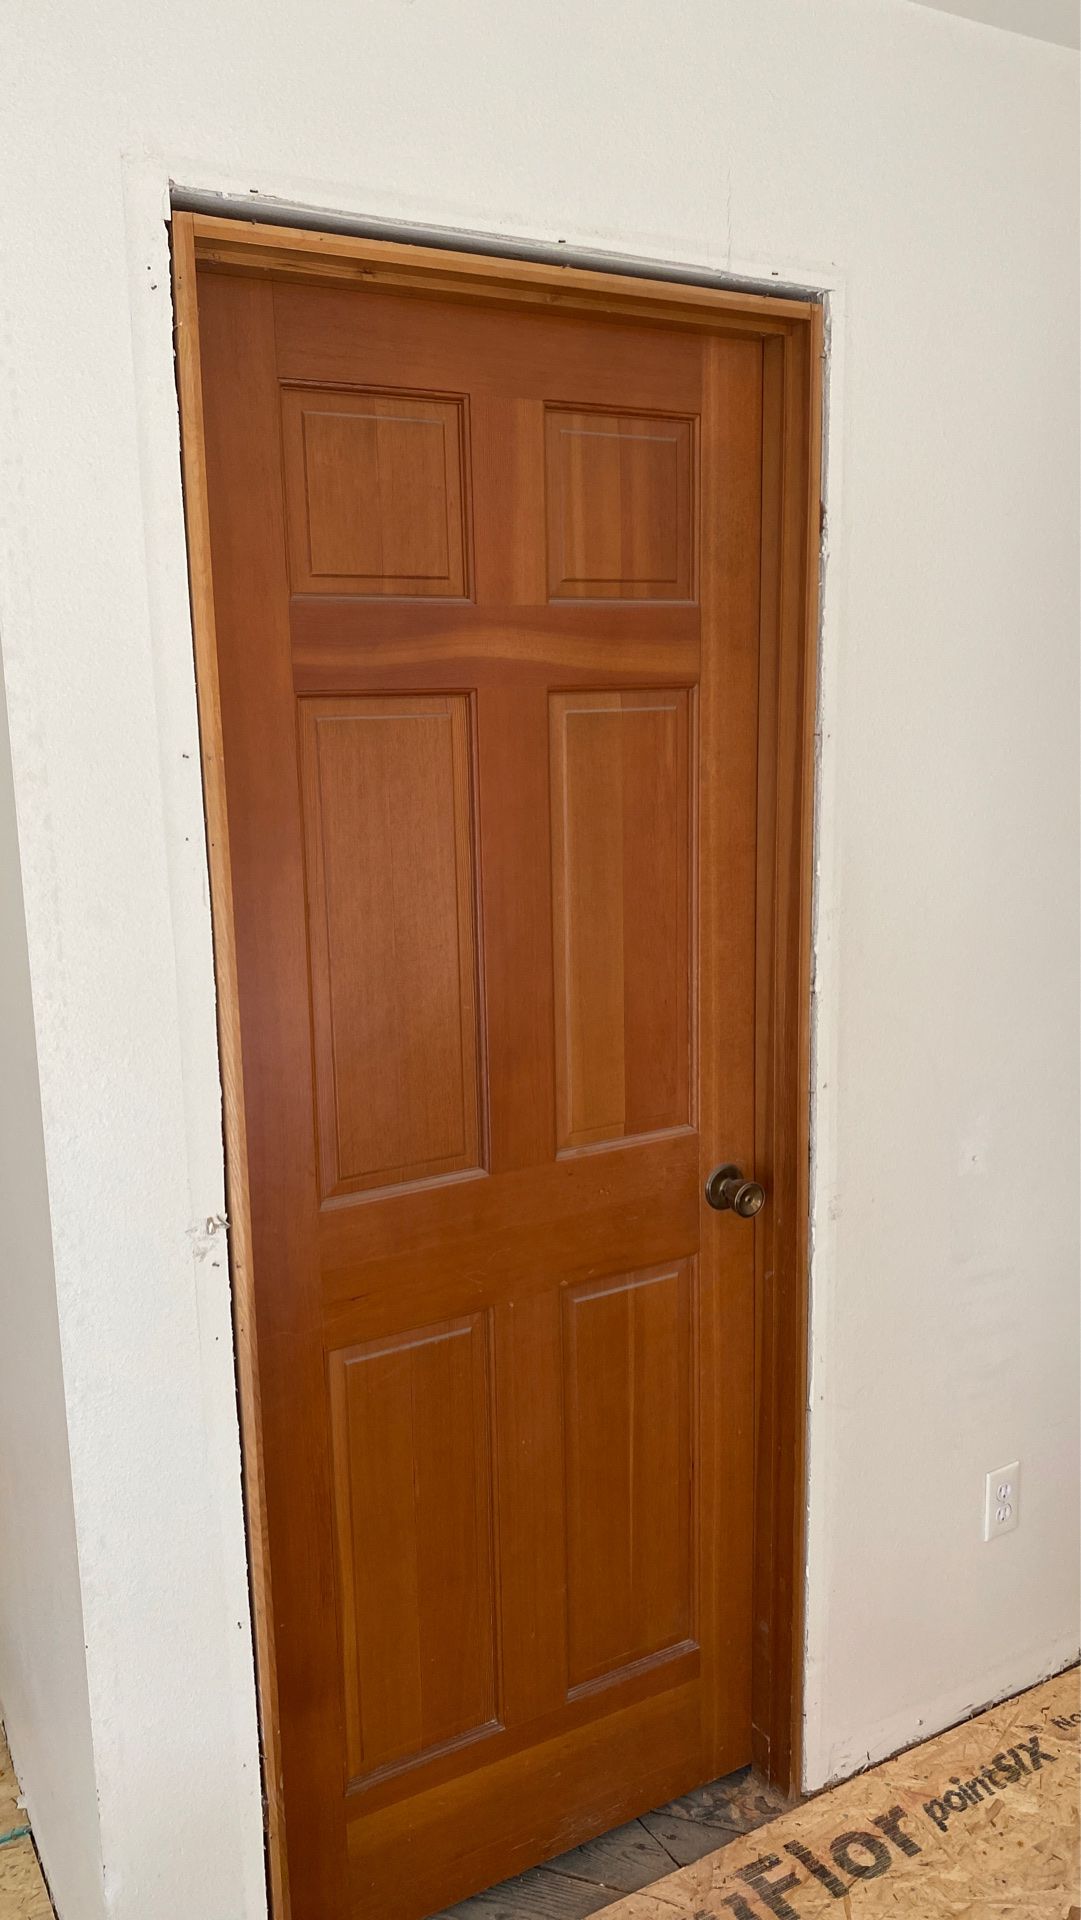 Solid wood 6 panel interior doors. Various sizes